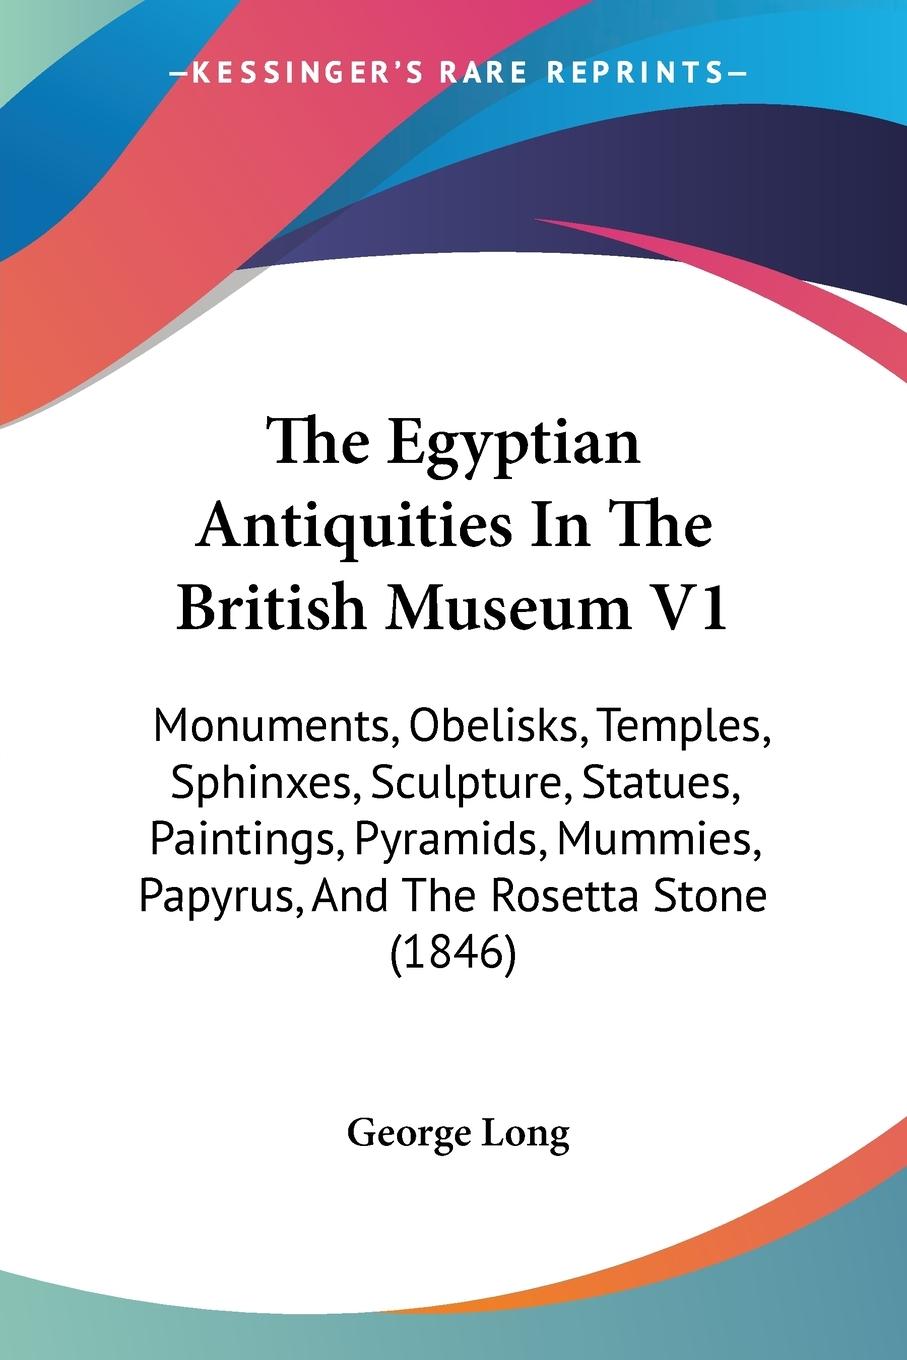 The Egyptian Antiquities In The British Museum V1 - Long, George